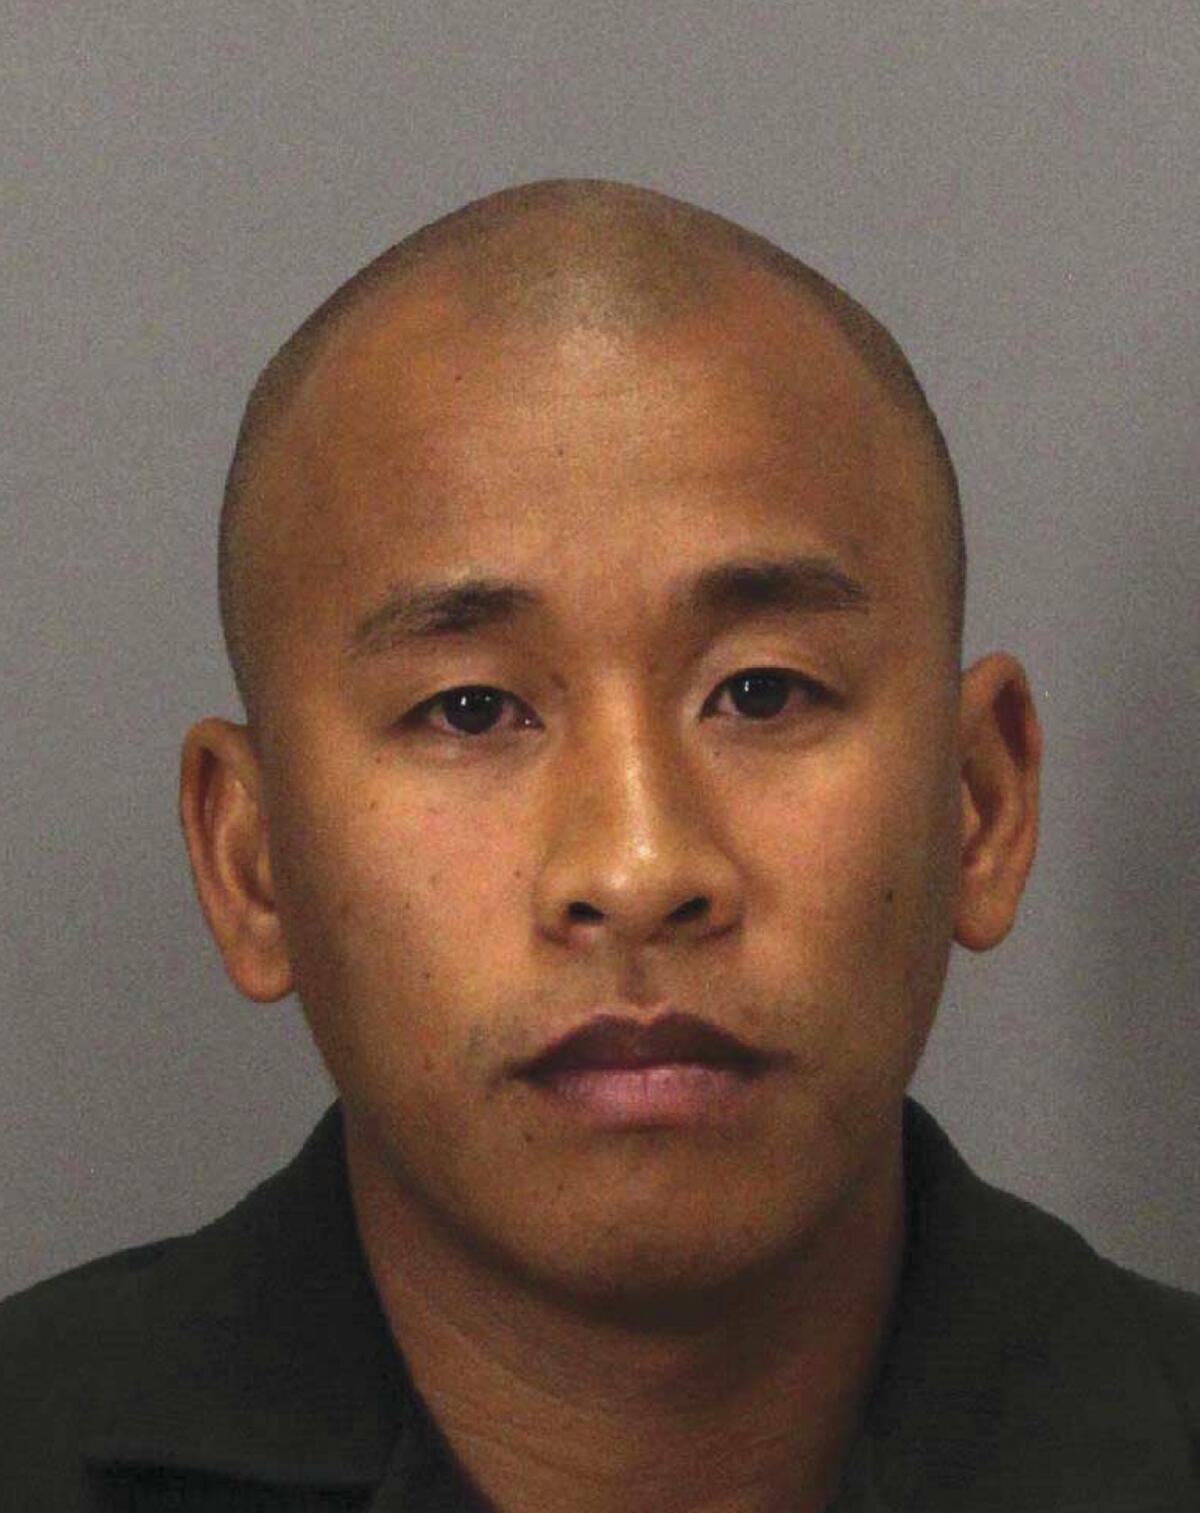 FILE - This undated booking photo released by the Santa Clara County Sheriff's Department shows Jereh Lubrin. An appellate court has reversed the murder convictions of the three Northern California deputies convicted in the 2015 jail beating death of a mentally ill inmate after a judge ruled that the primary legal theory prosecutors cited was invalidated by recent changes in state law. In 2017, former Santa Clara County Sheriff deputies Jereh Lubrin, Matthew Farris and Rafael Rodriguez were convicted by a San Jose jury of second-degree murder in the death of Michael Tyree. (Santa Clara County Sheriff's Dept. via AP, File)